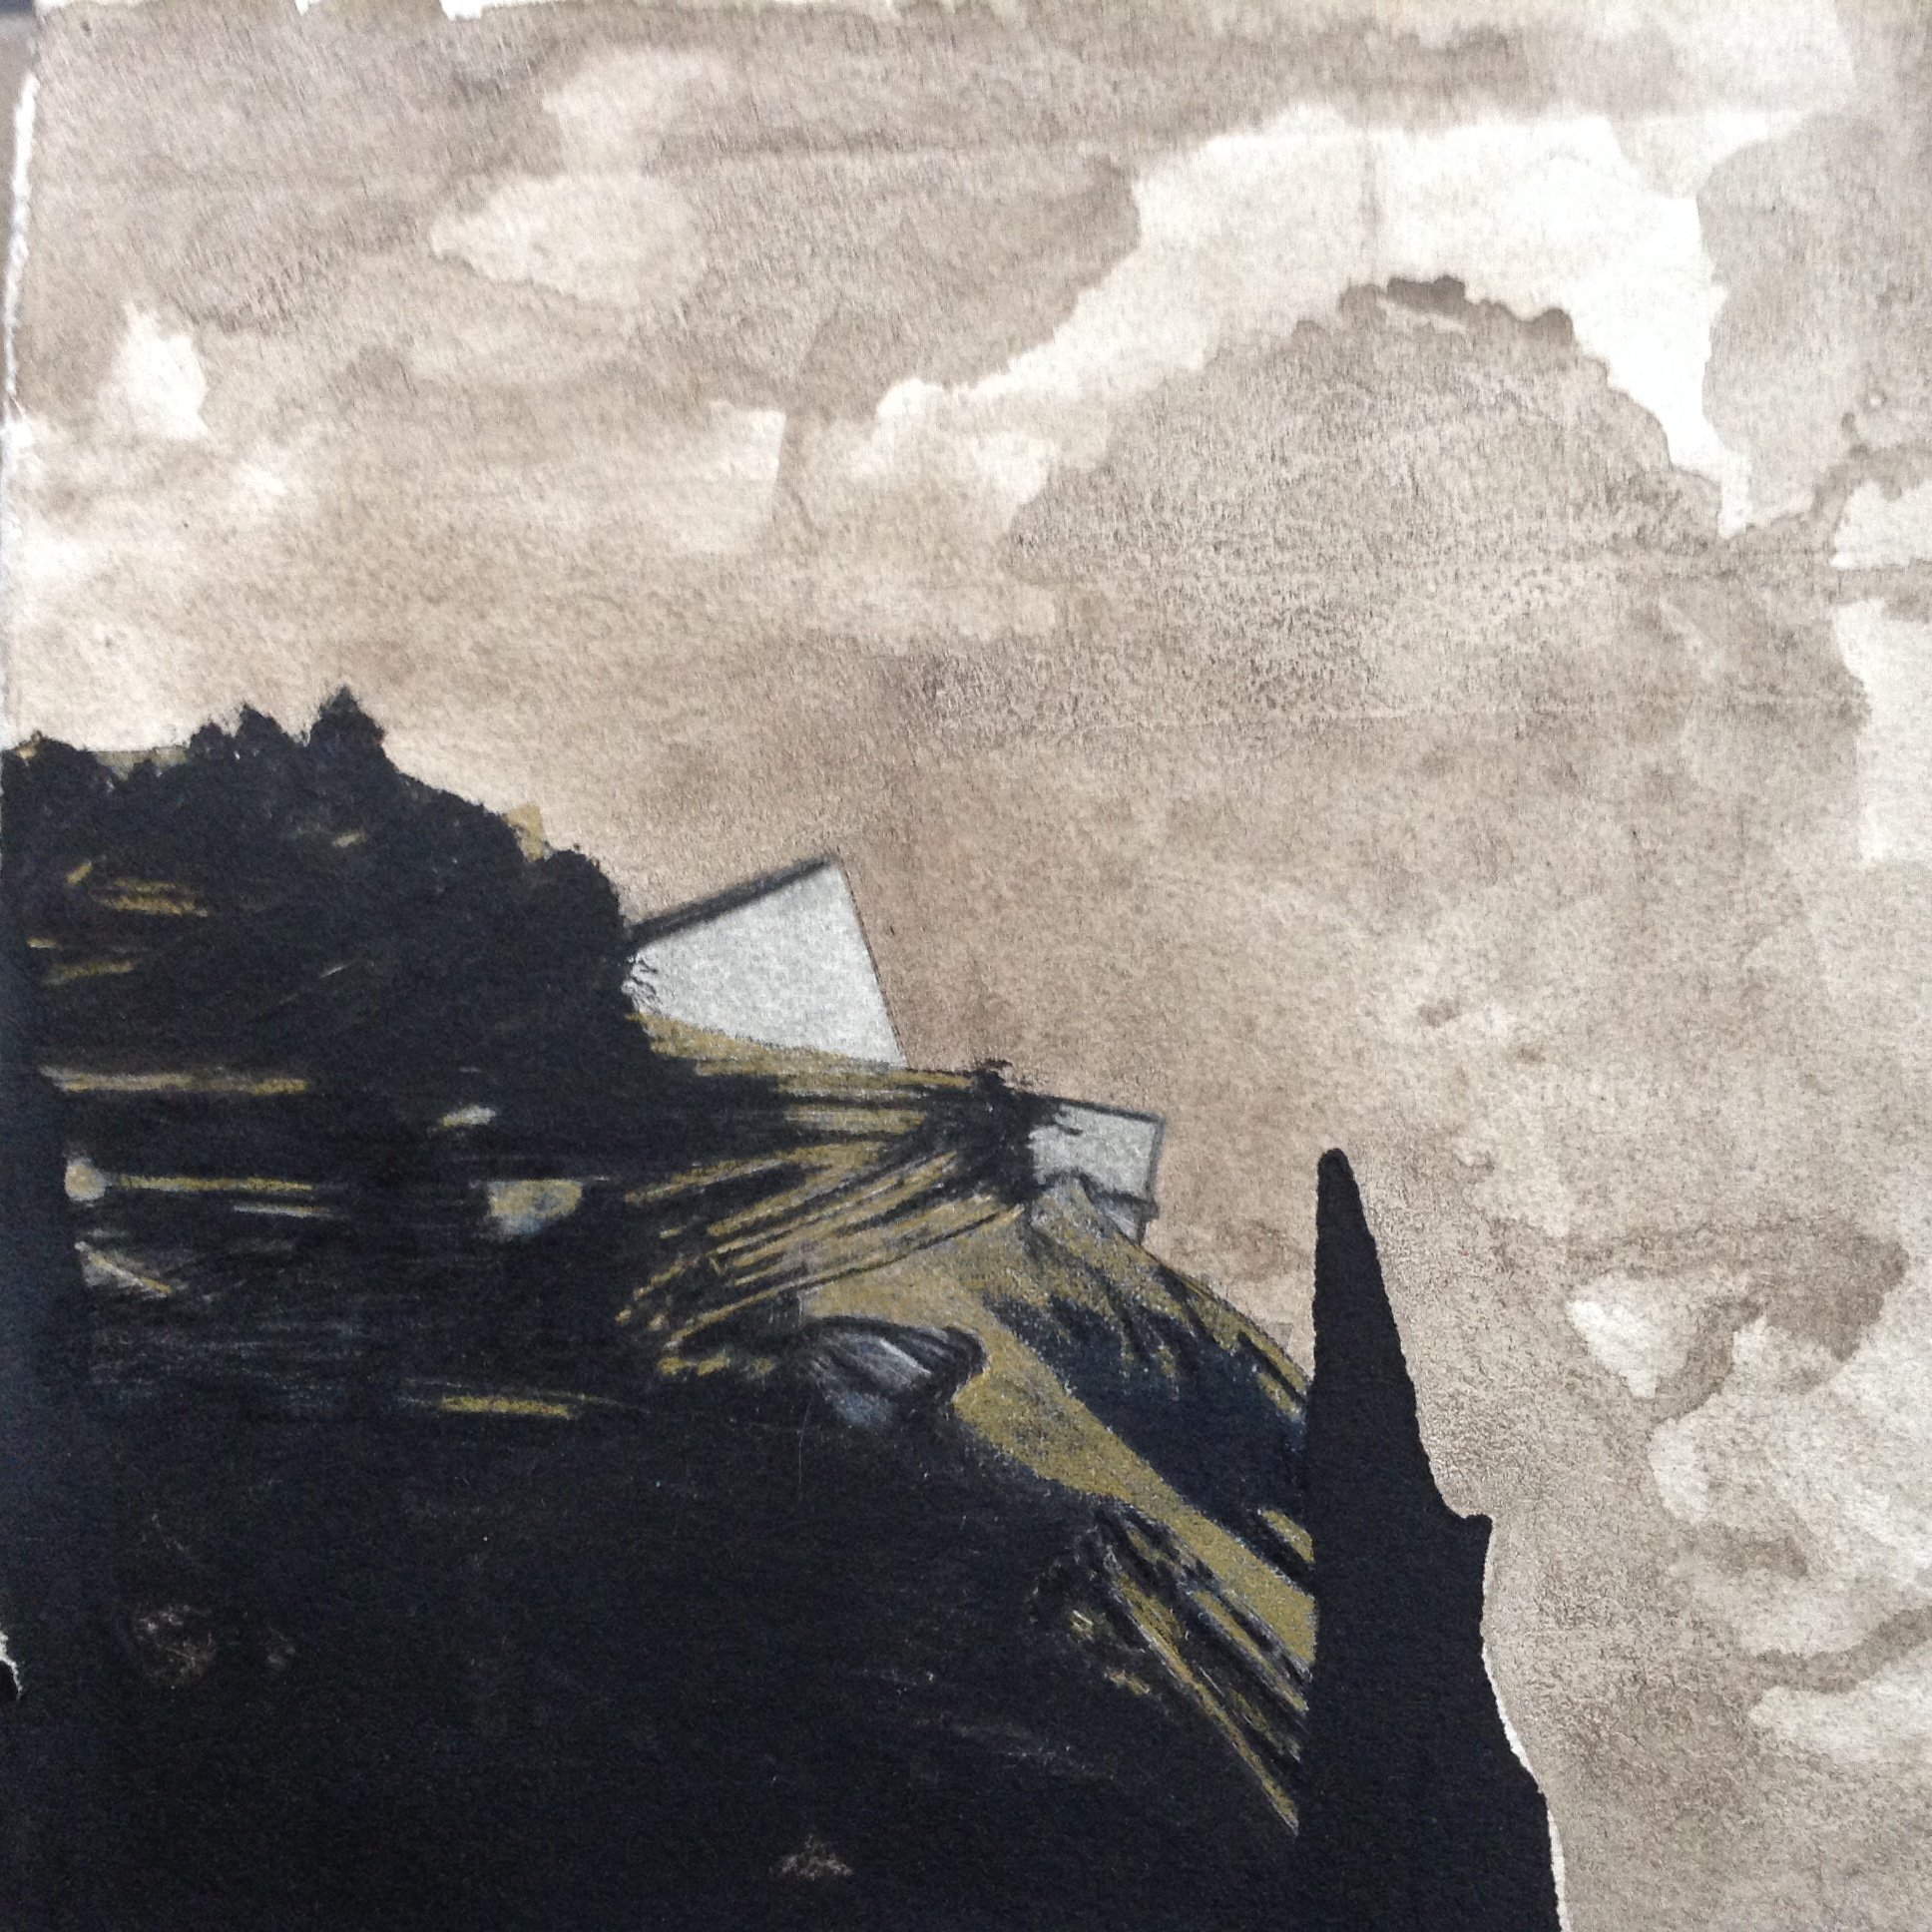    Cliff Face -  black walnut on archival paper, monotype, 10-inches square SOLD  